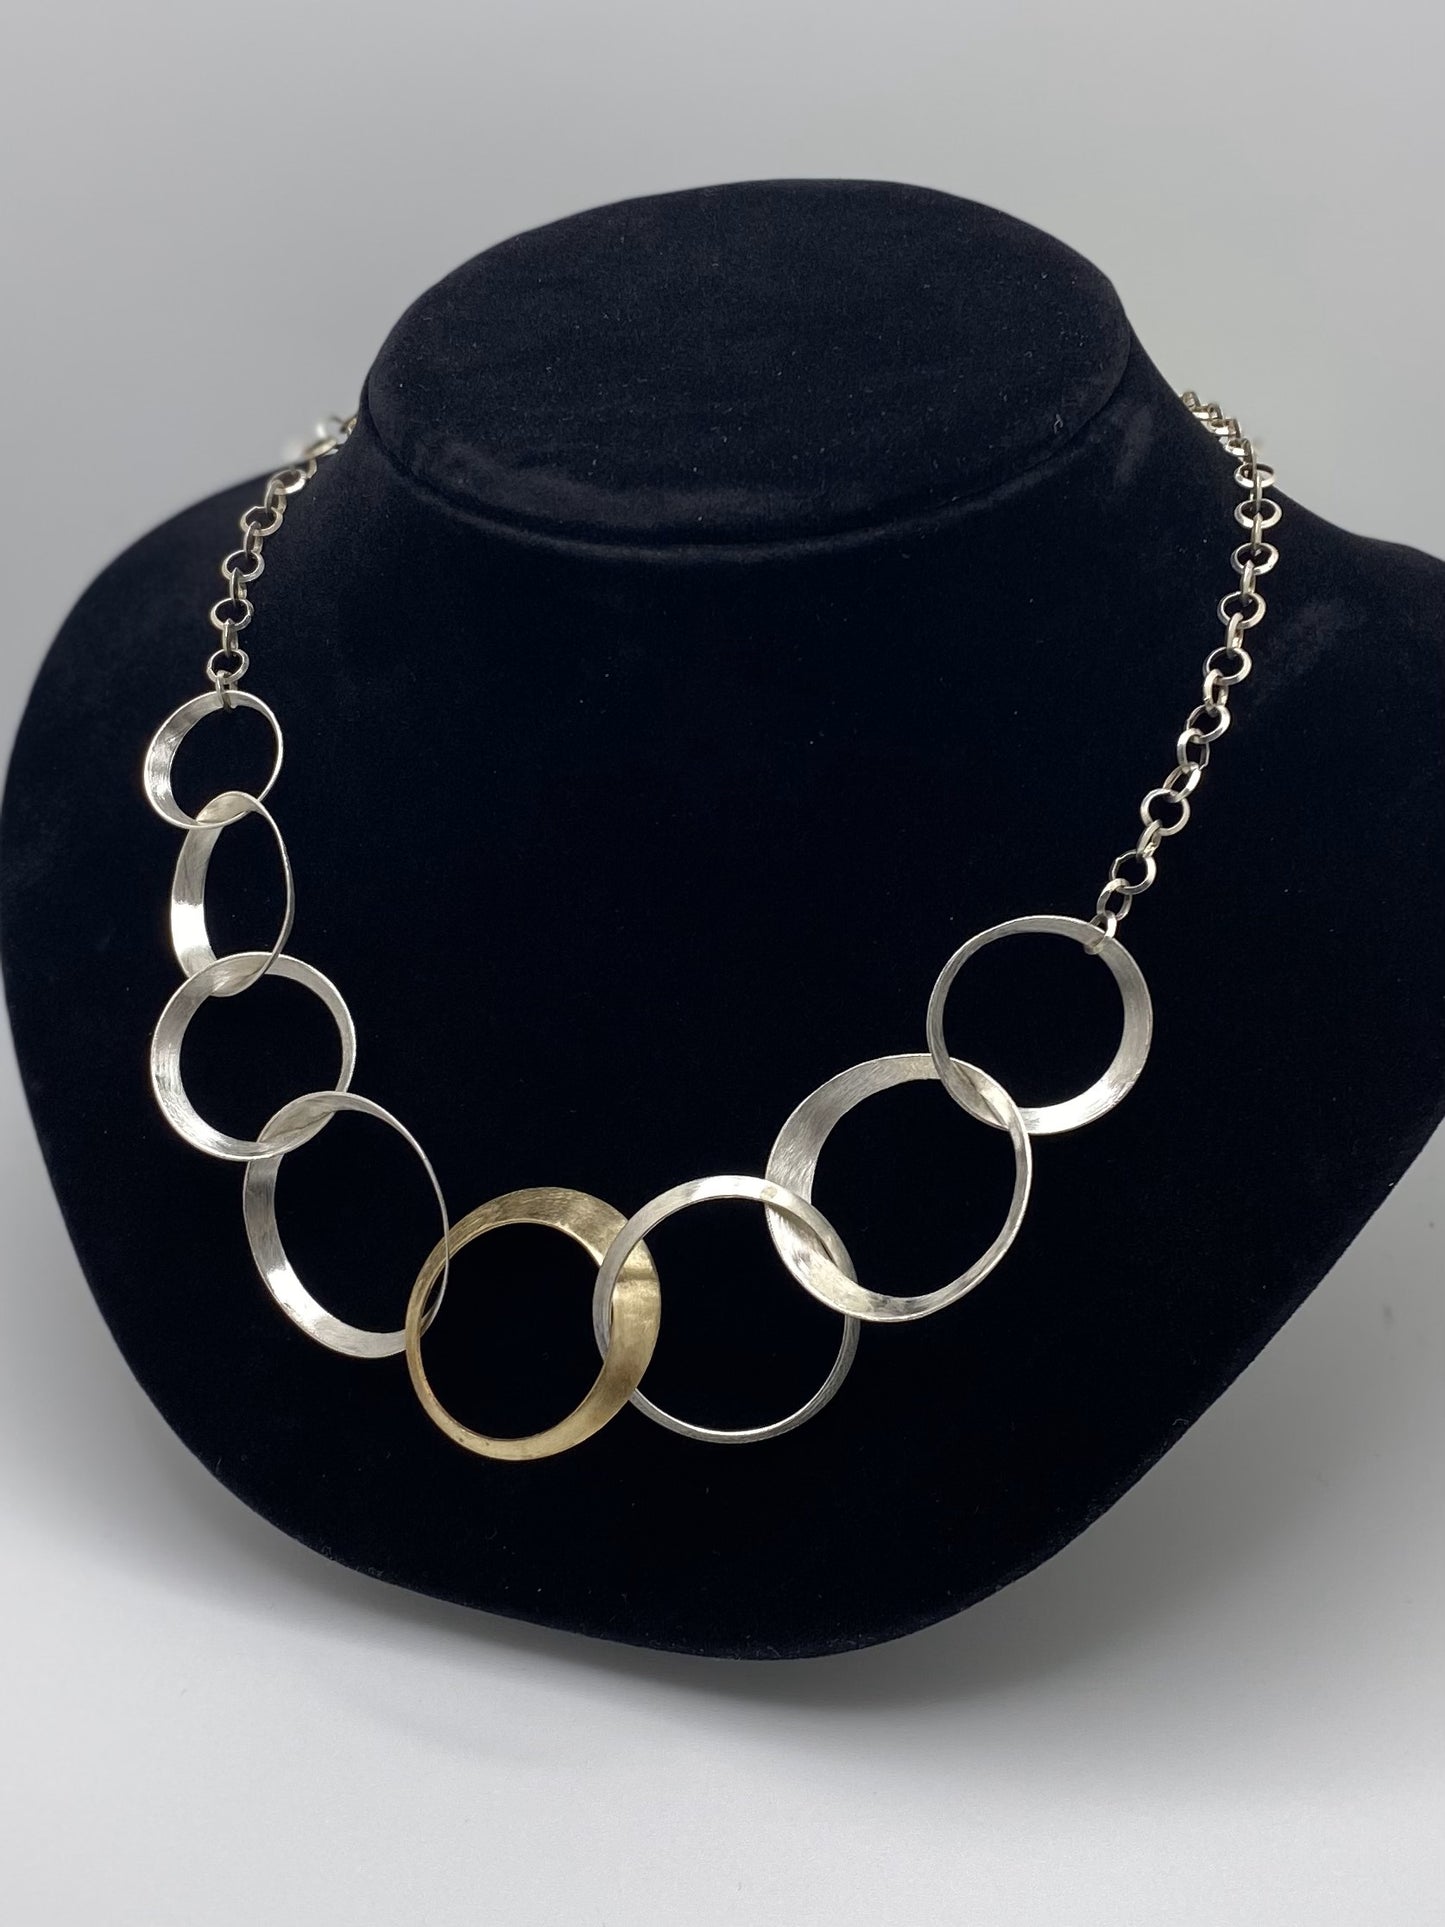 Eight Circles Handmade Necklace in Round Sterling Silver & Brass